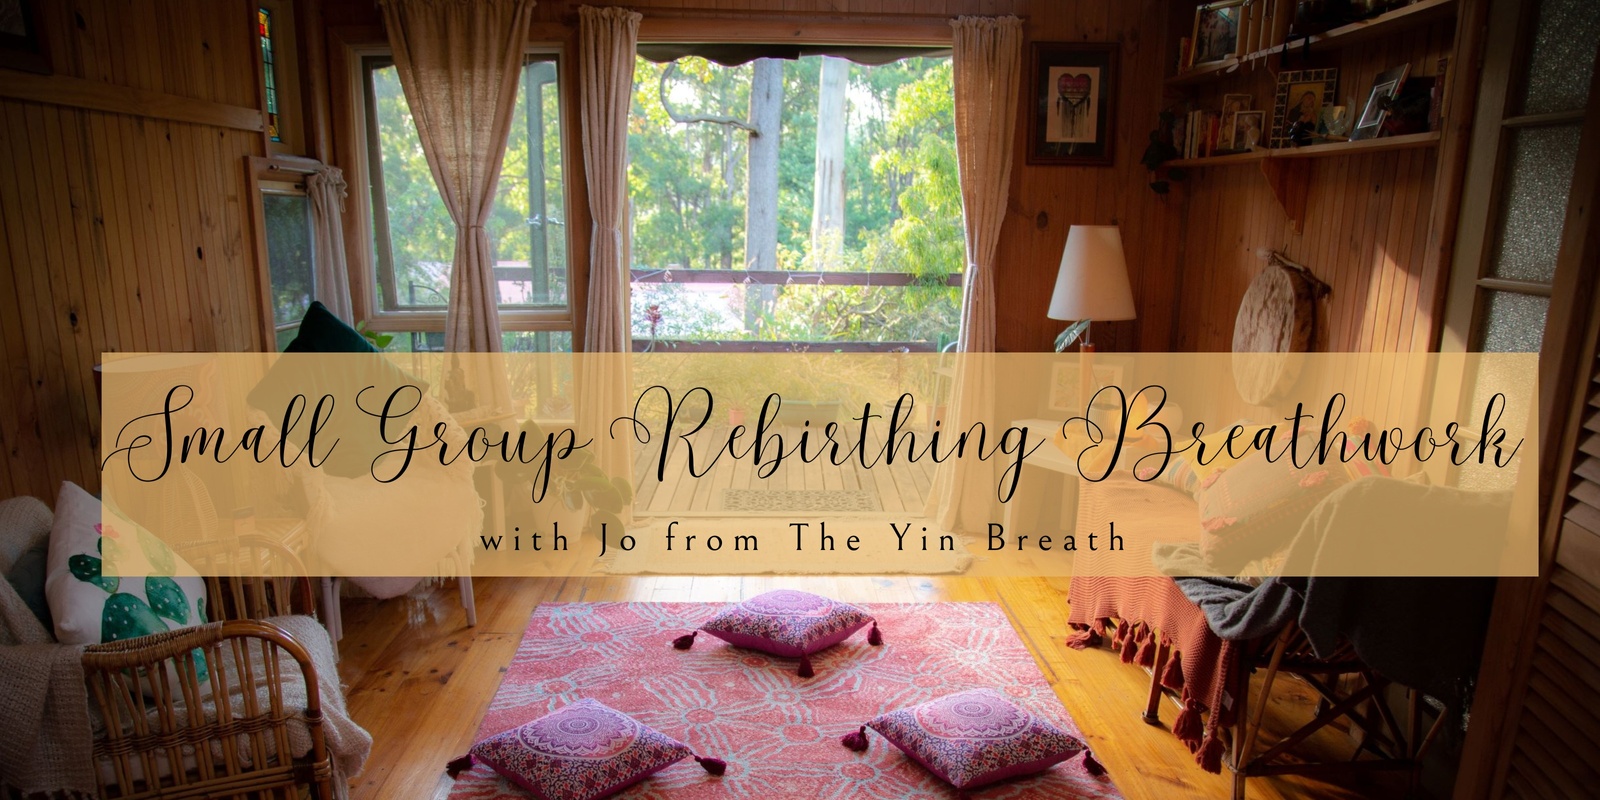 Banner image for Small Group Rebirthing Breathwork in the heart of the Sherbrooke Forest